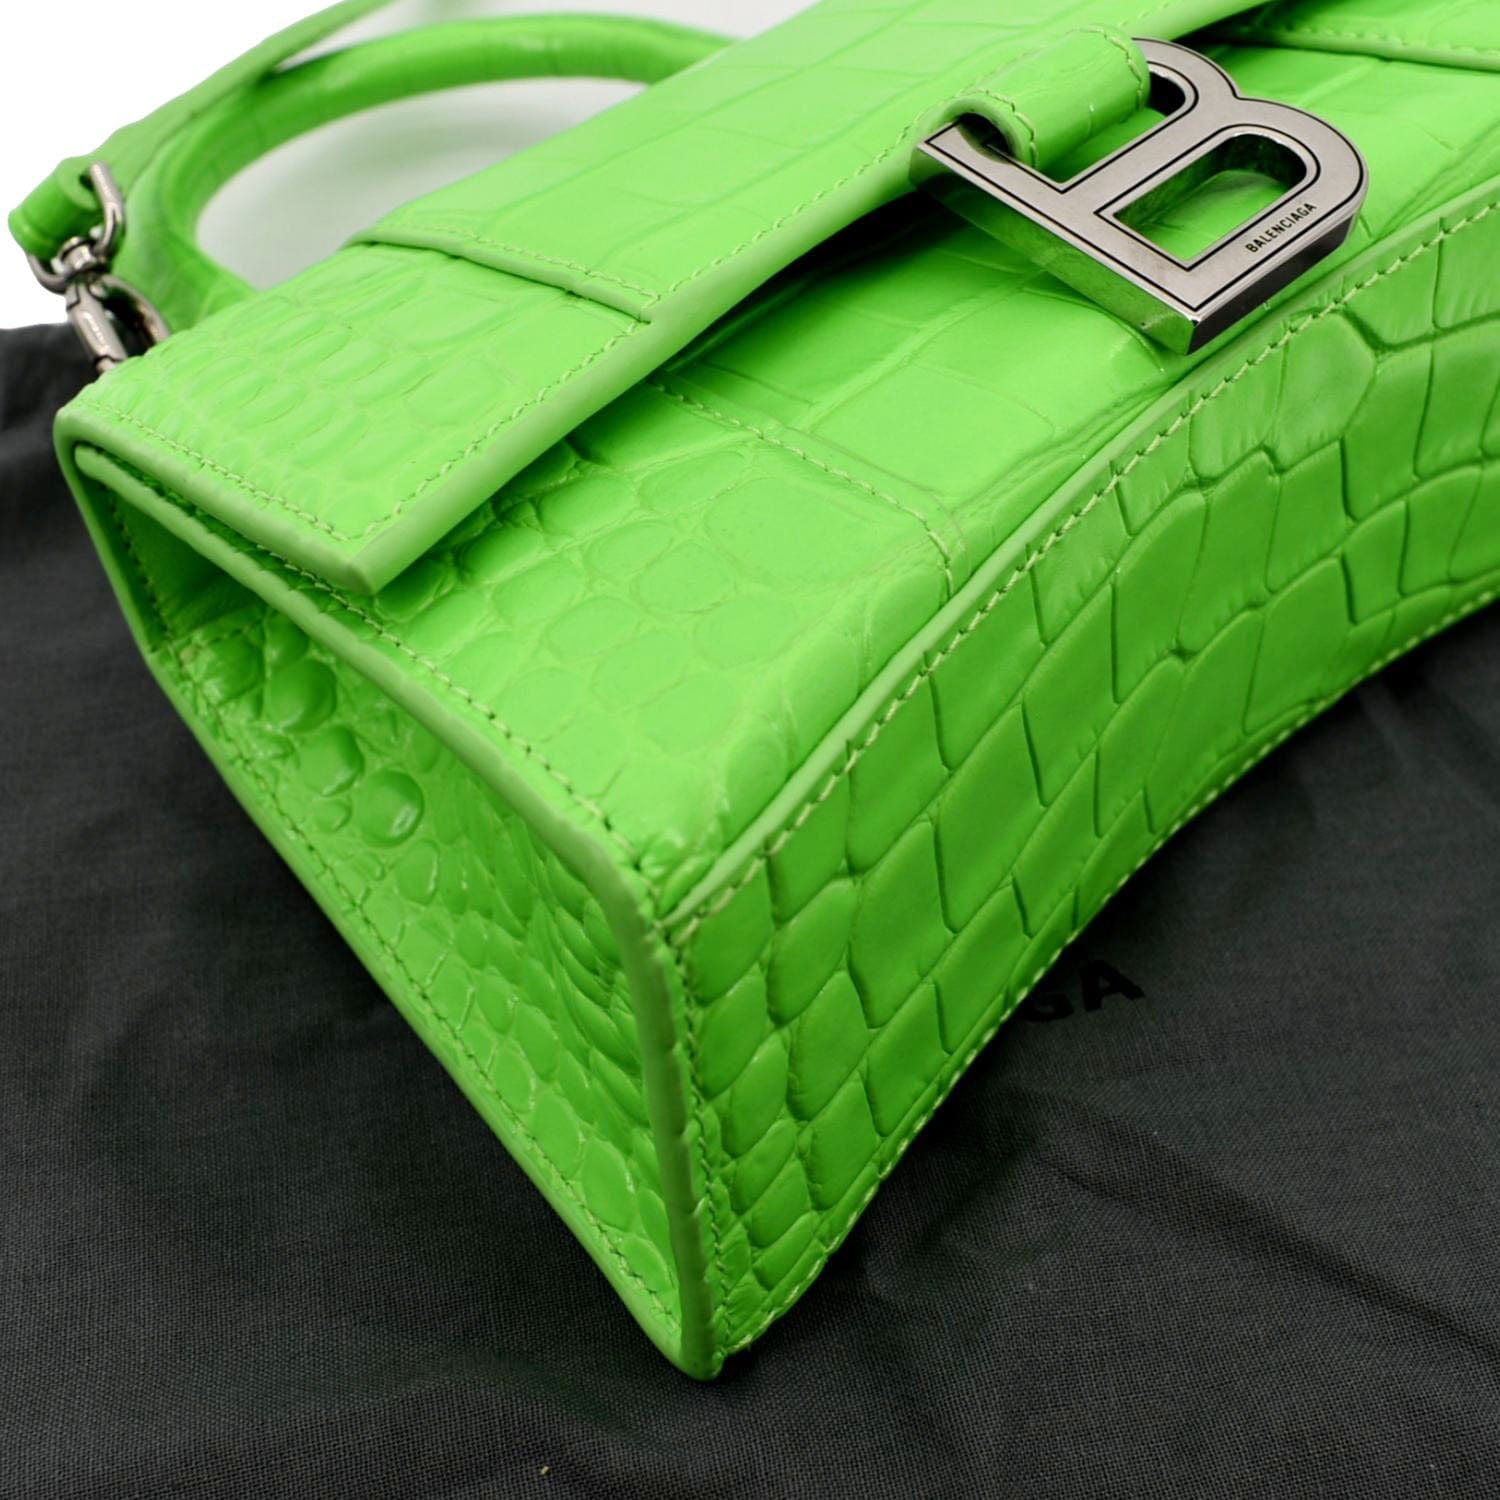 Balenciaga Extra Small Hourglass Croc Embossed Leather Top Handle